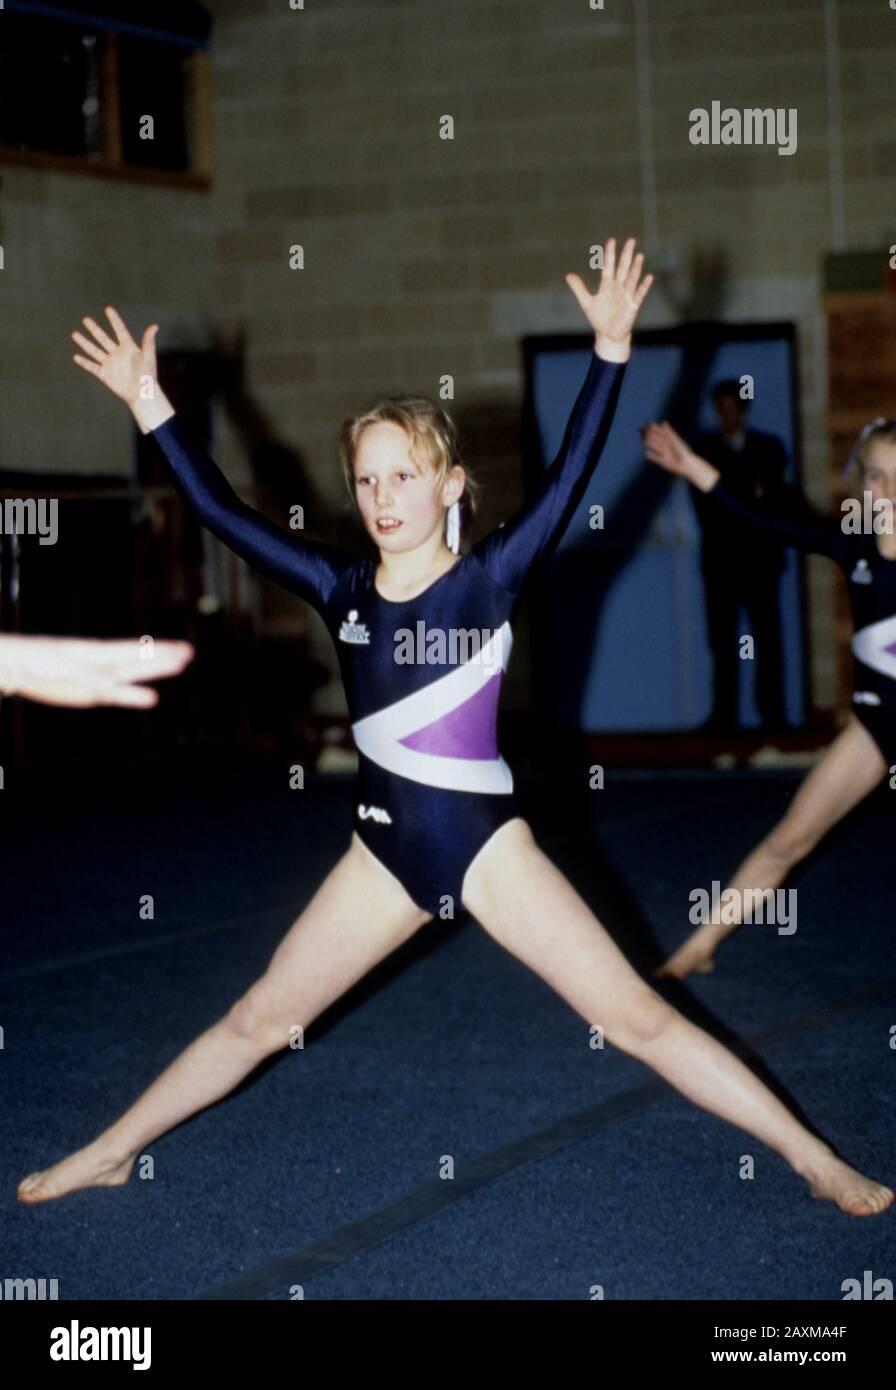 Zara Phillips at the Port Regis School during a Royal visit by HM Queen Elizabeth II, Shaftesbury, England 1991. Stock Photo